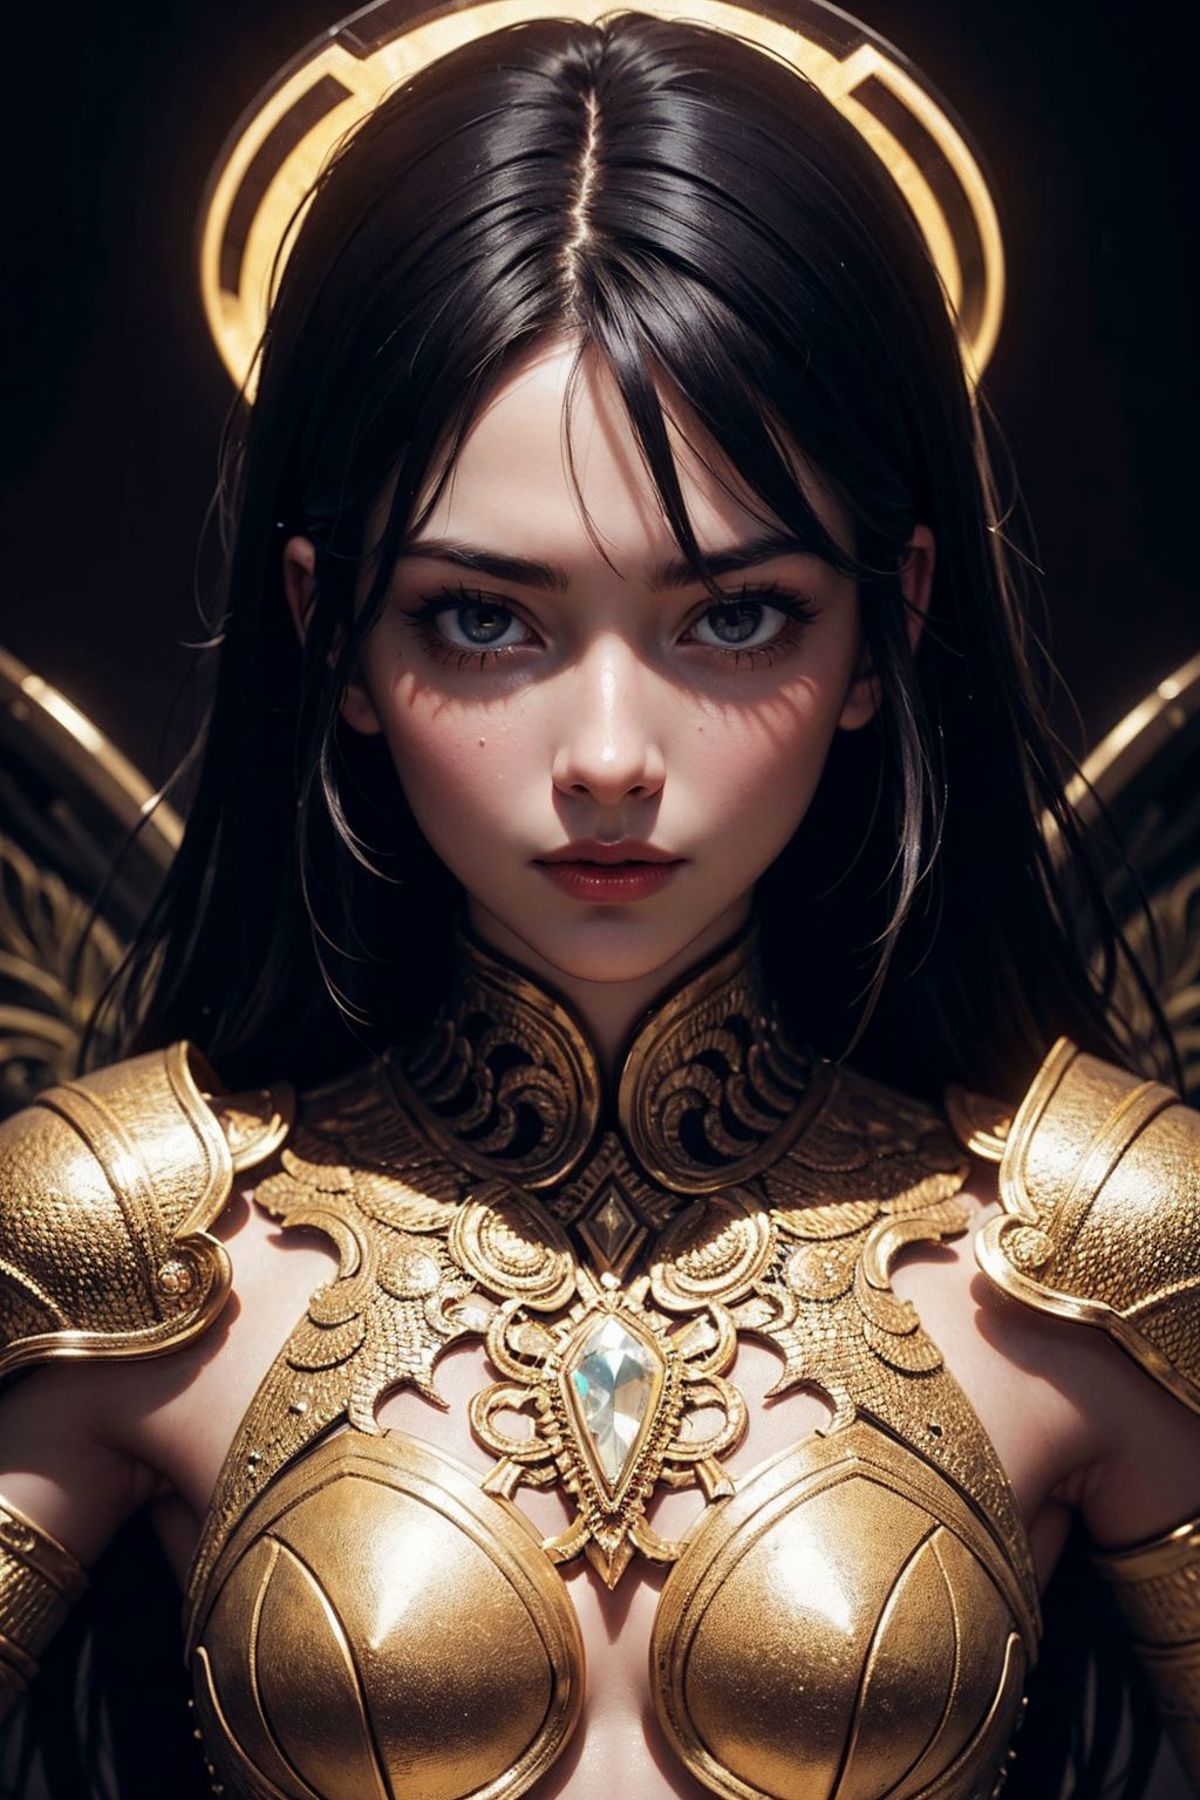 Anime-style woman with dark hair, blue eyes, and gold armor.